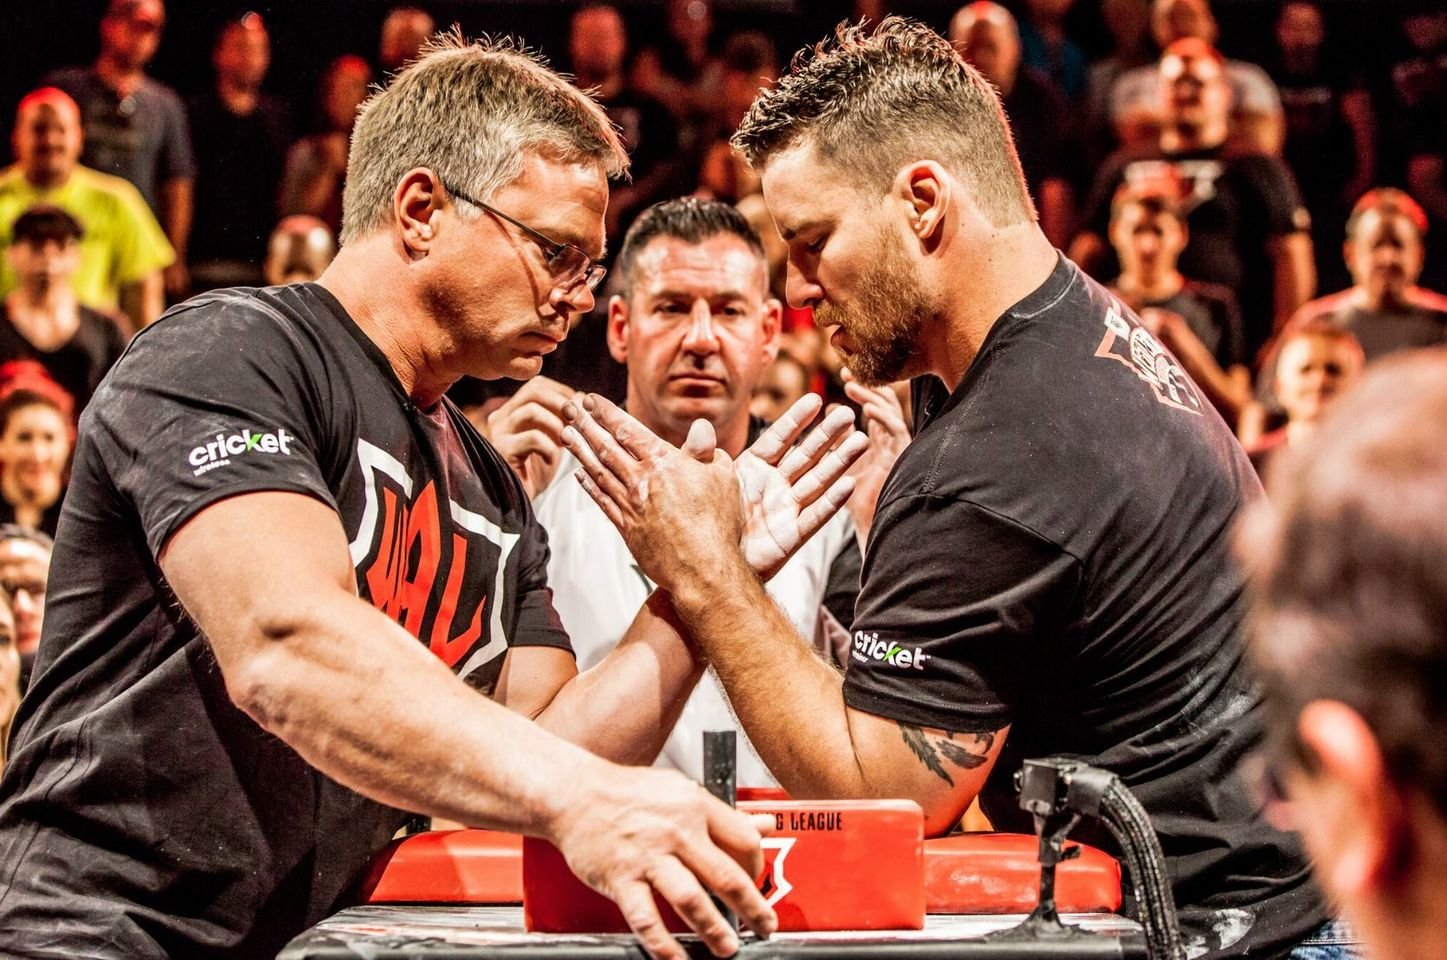 John Brzenk (left) set to lock wrists at a left-handed arm wrestling match in 2015. With hundreds of titles to his name, including 4 World Championships, Brzenk is the GOAT in organized arm wrestling.